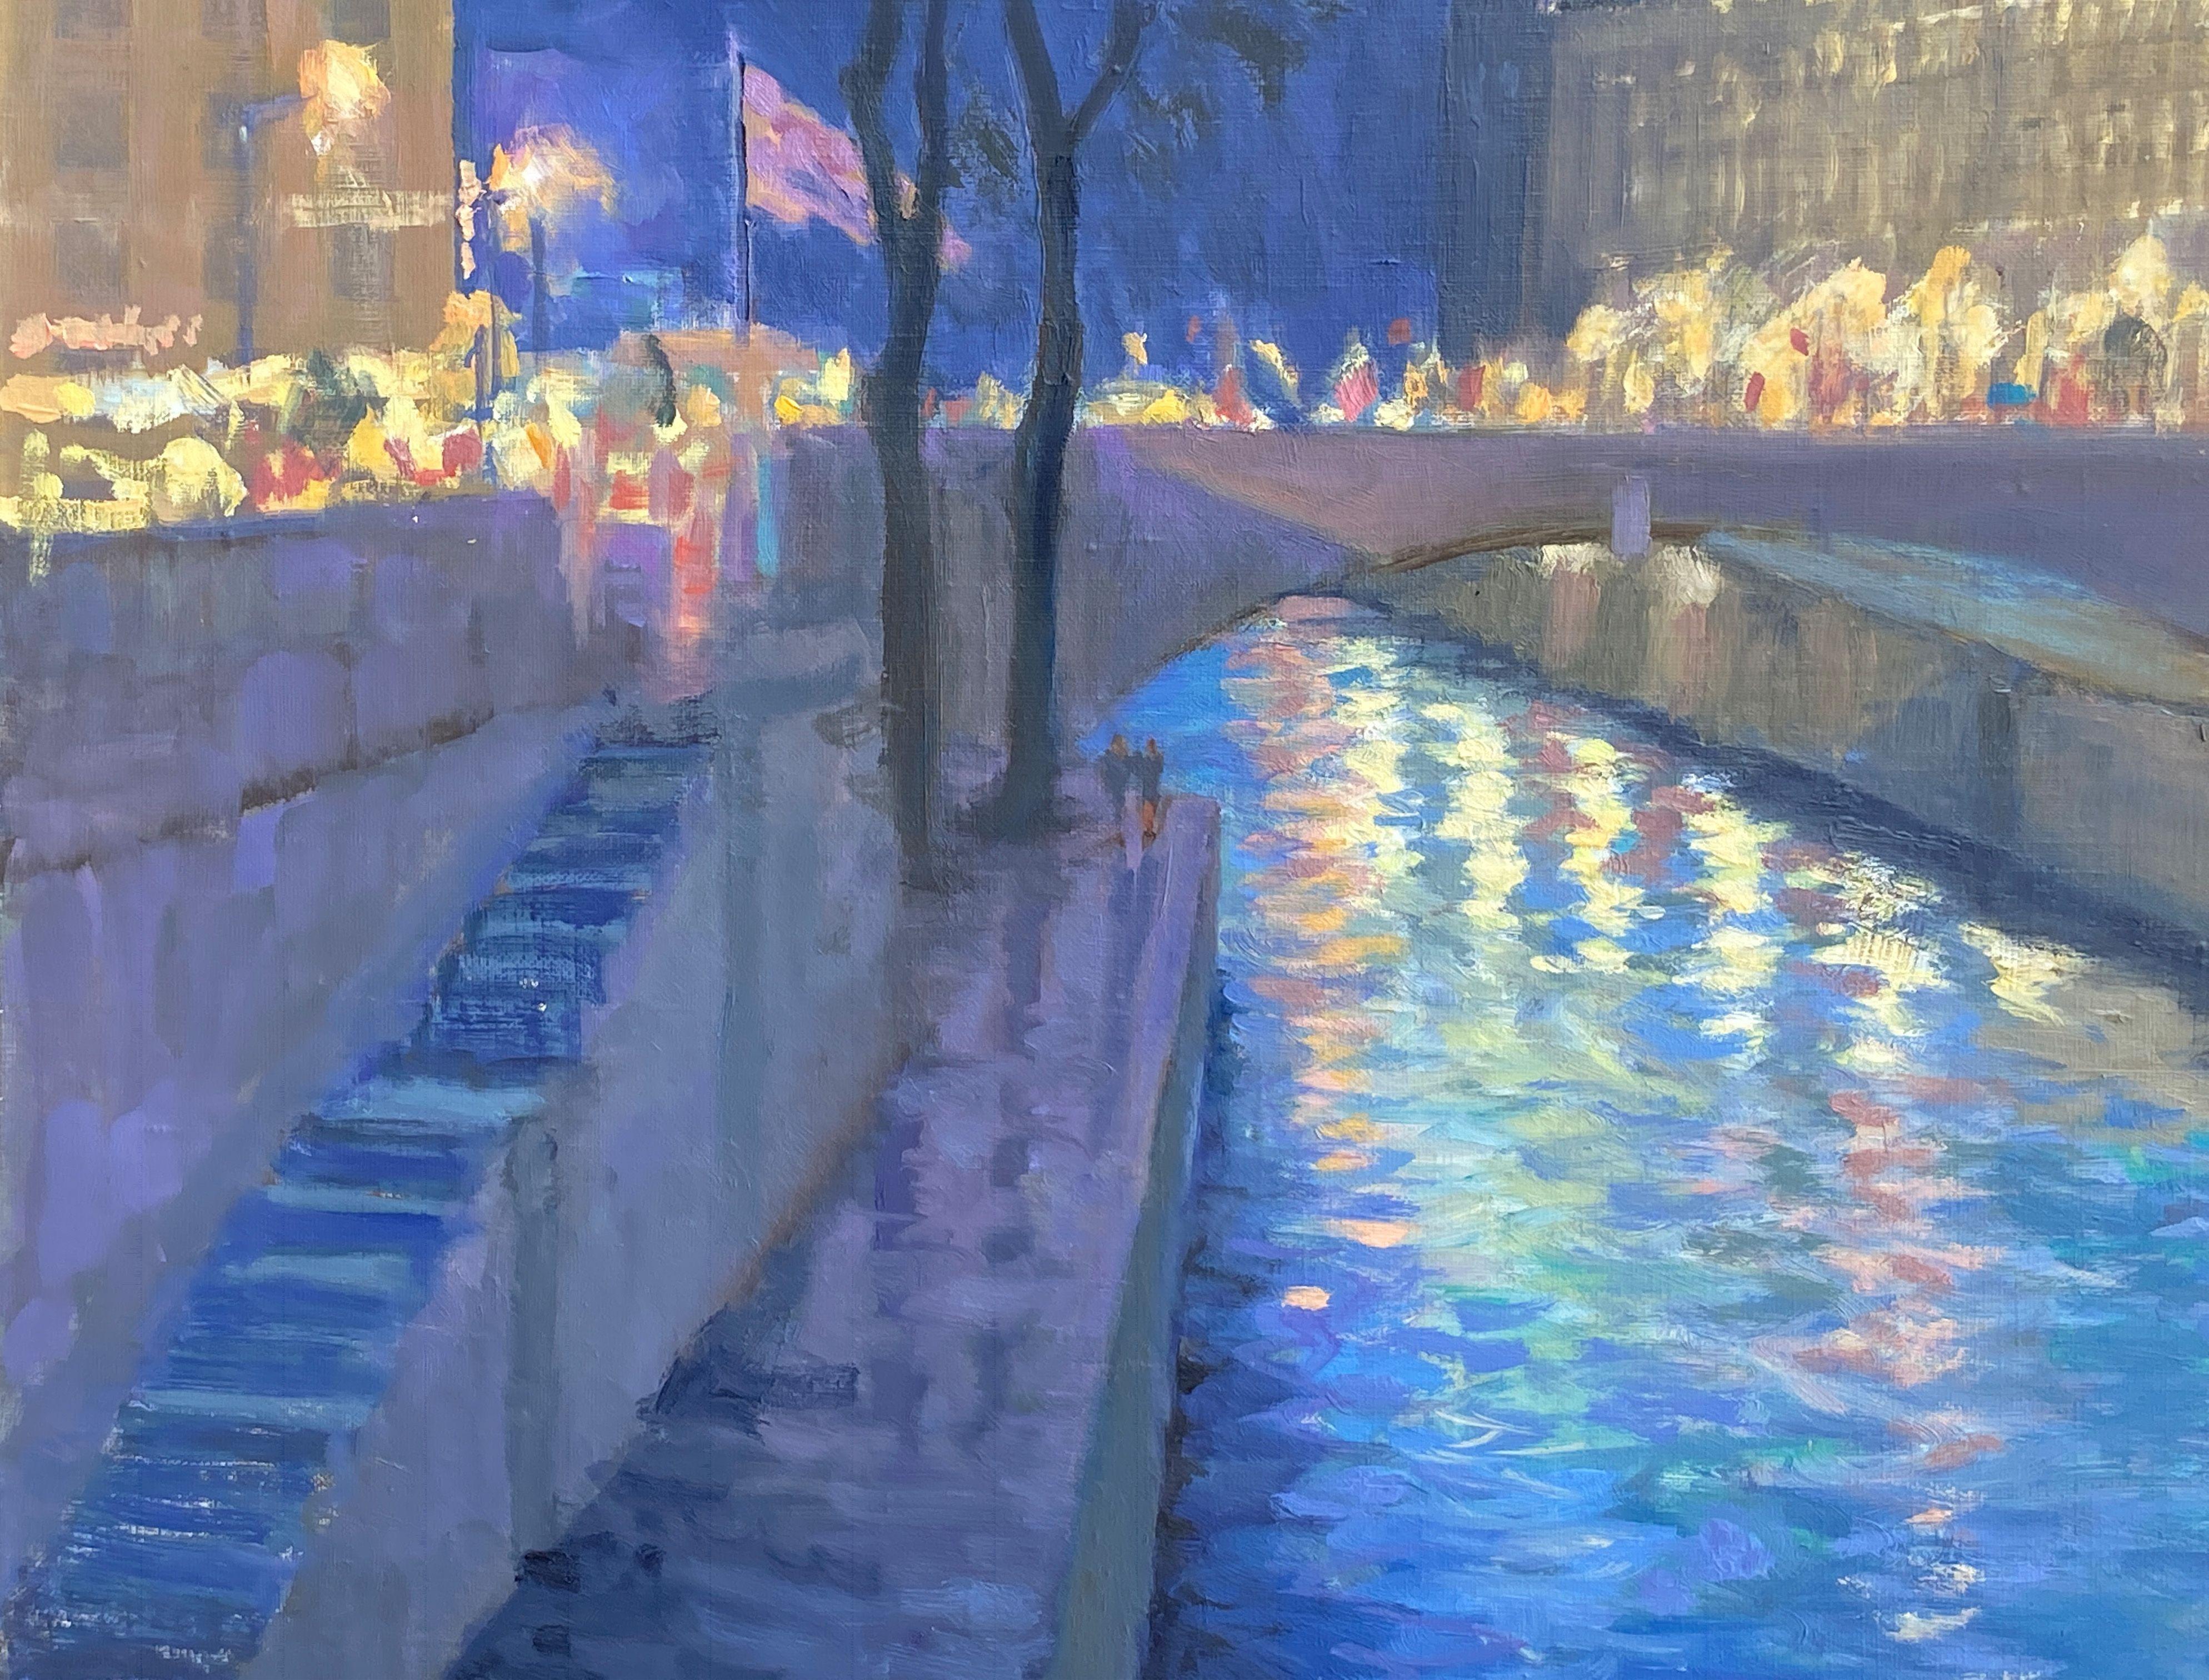 With this painting, I will take you on an unforgettable nocturnal stroll through an iconic Parisian neighborhoods, and introduce you to the cityâ€™s streets after dark, revealing hidden treasures and unexpected delights.     Materials:   Oil on